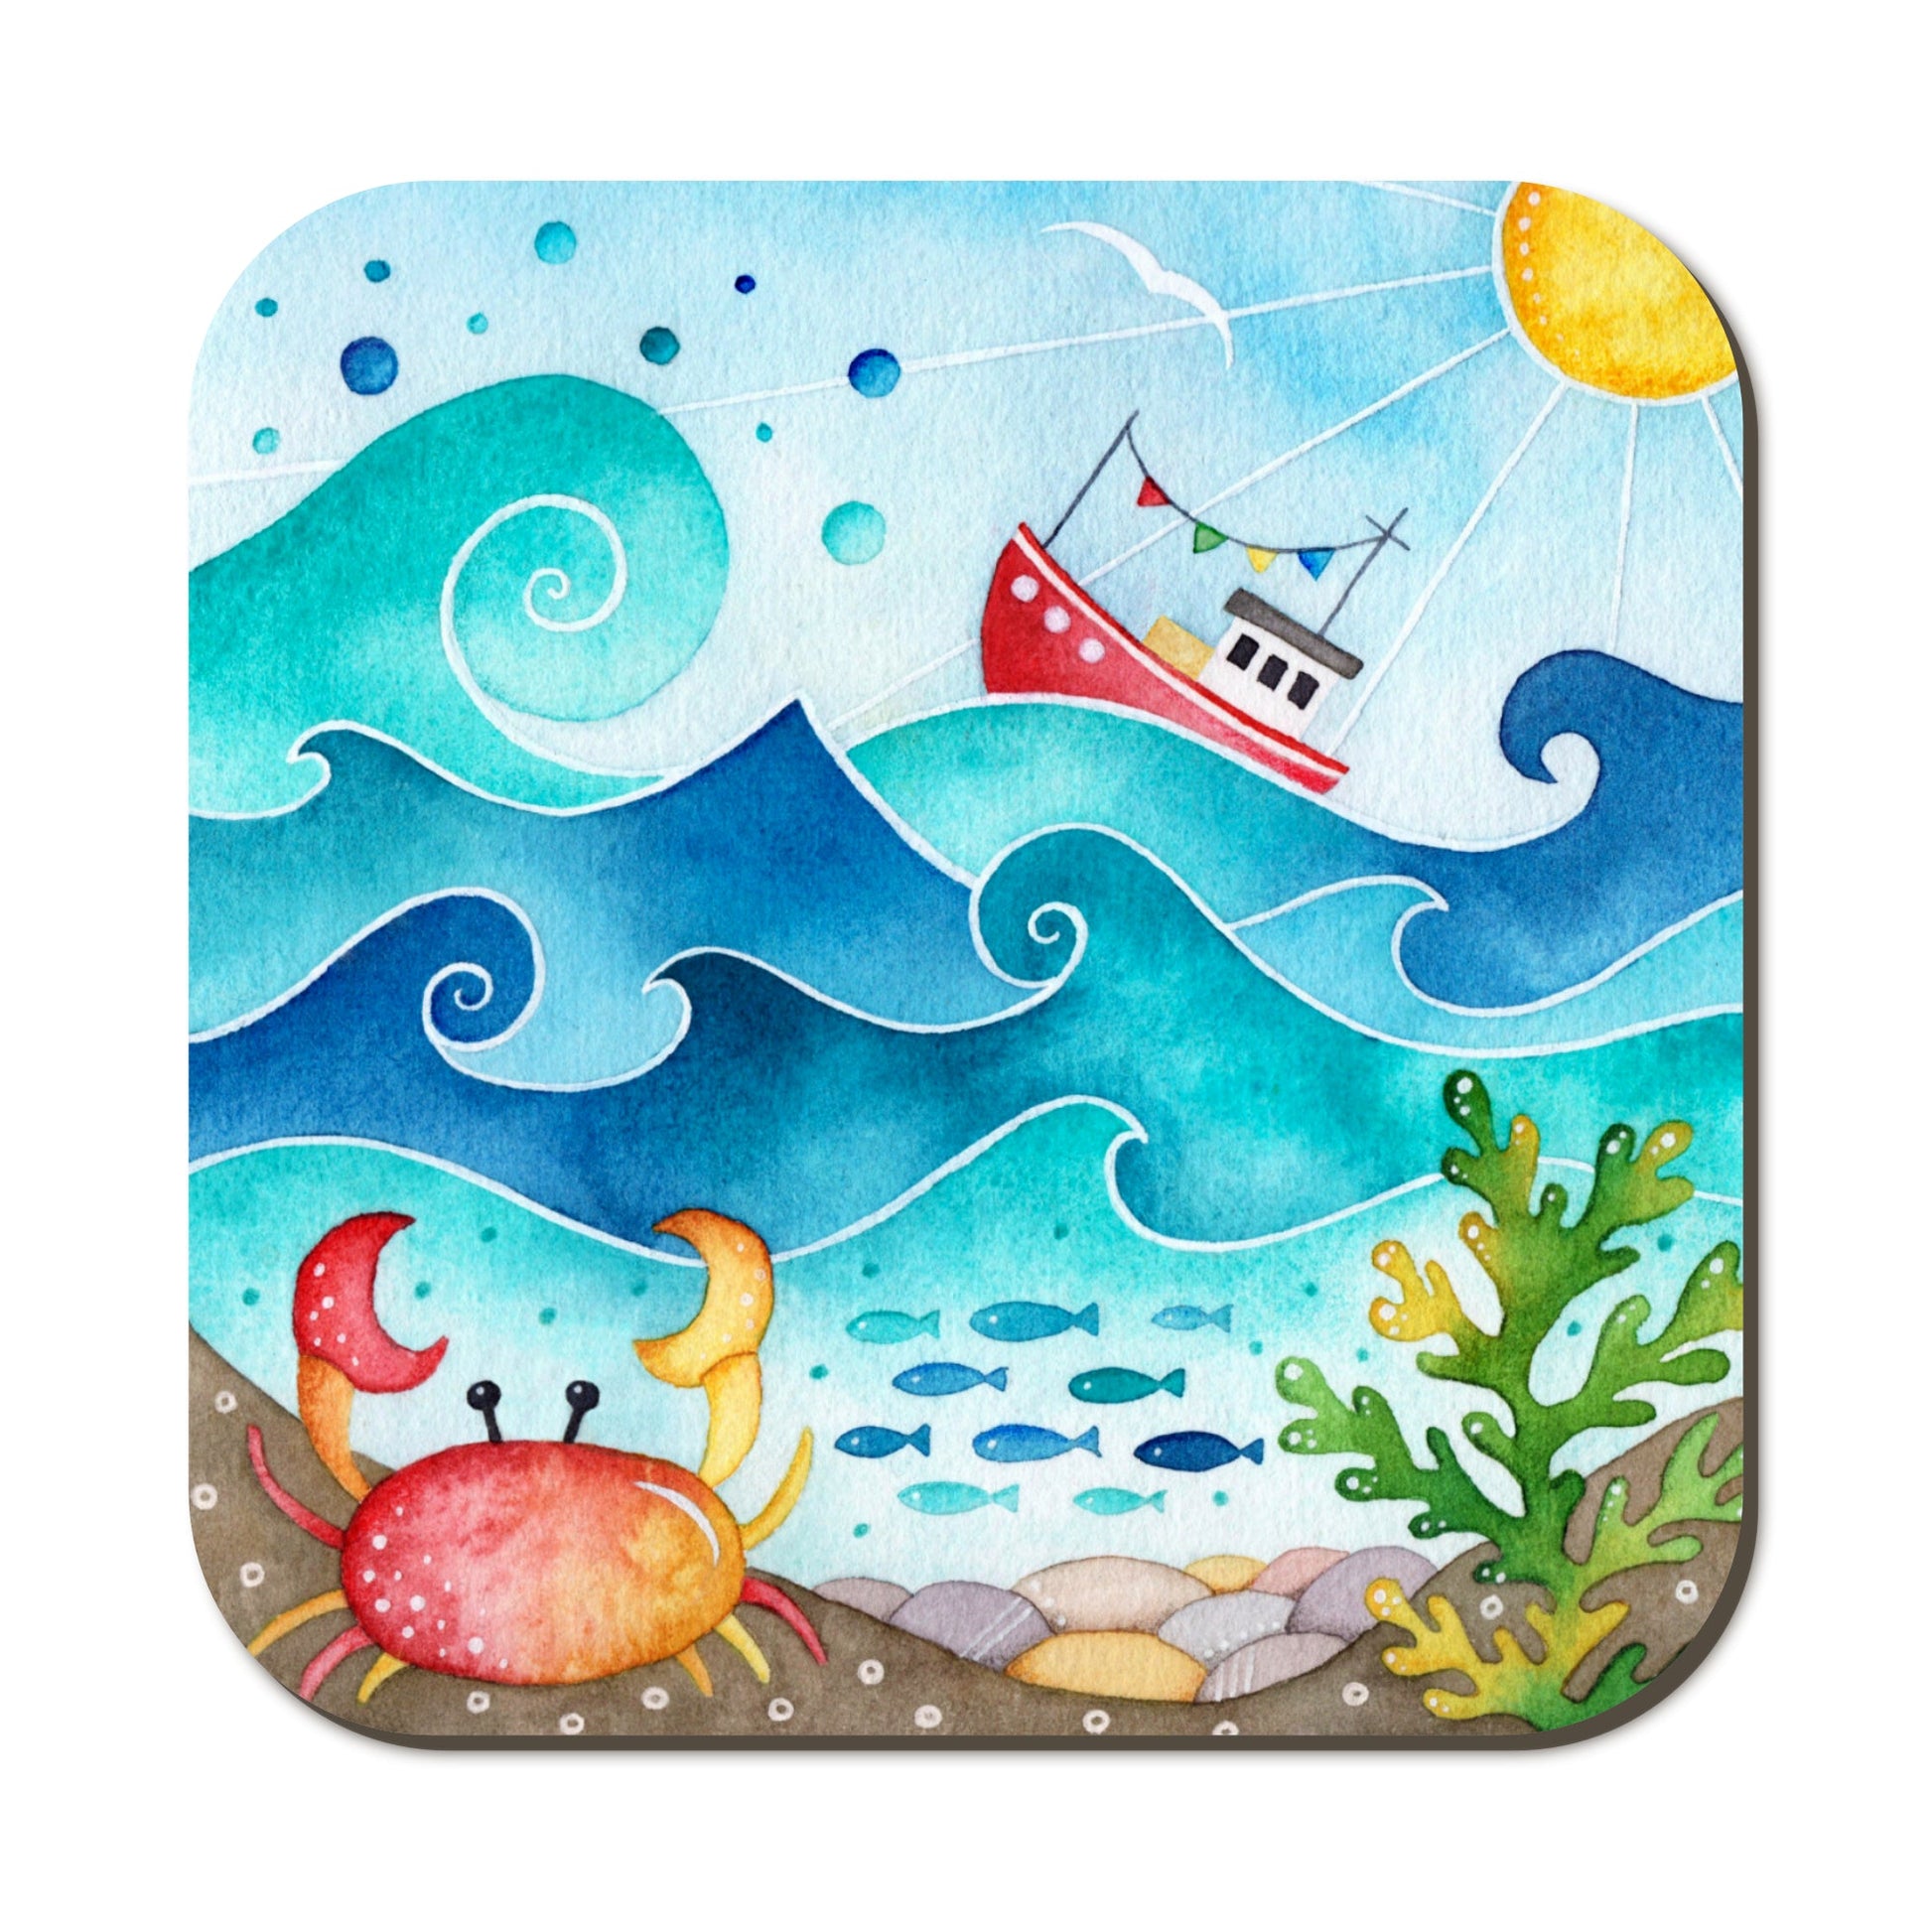 Coaster - Fishing Boat and Crab - Seaside Watercolours, East Neuk of Fife - East Neuk Beach Crafts